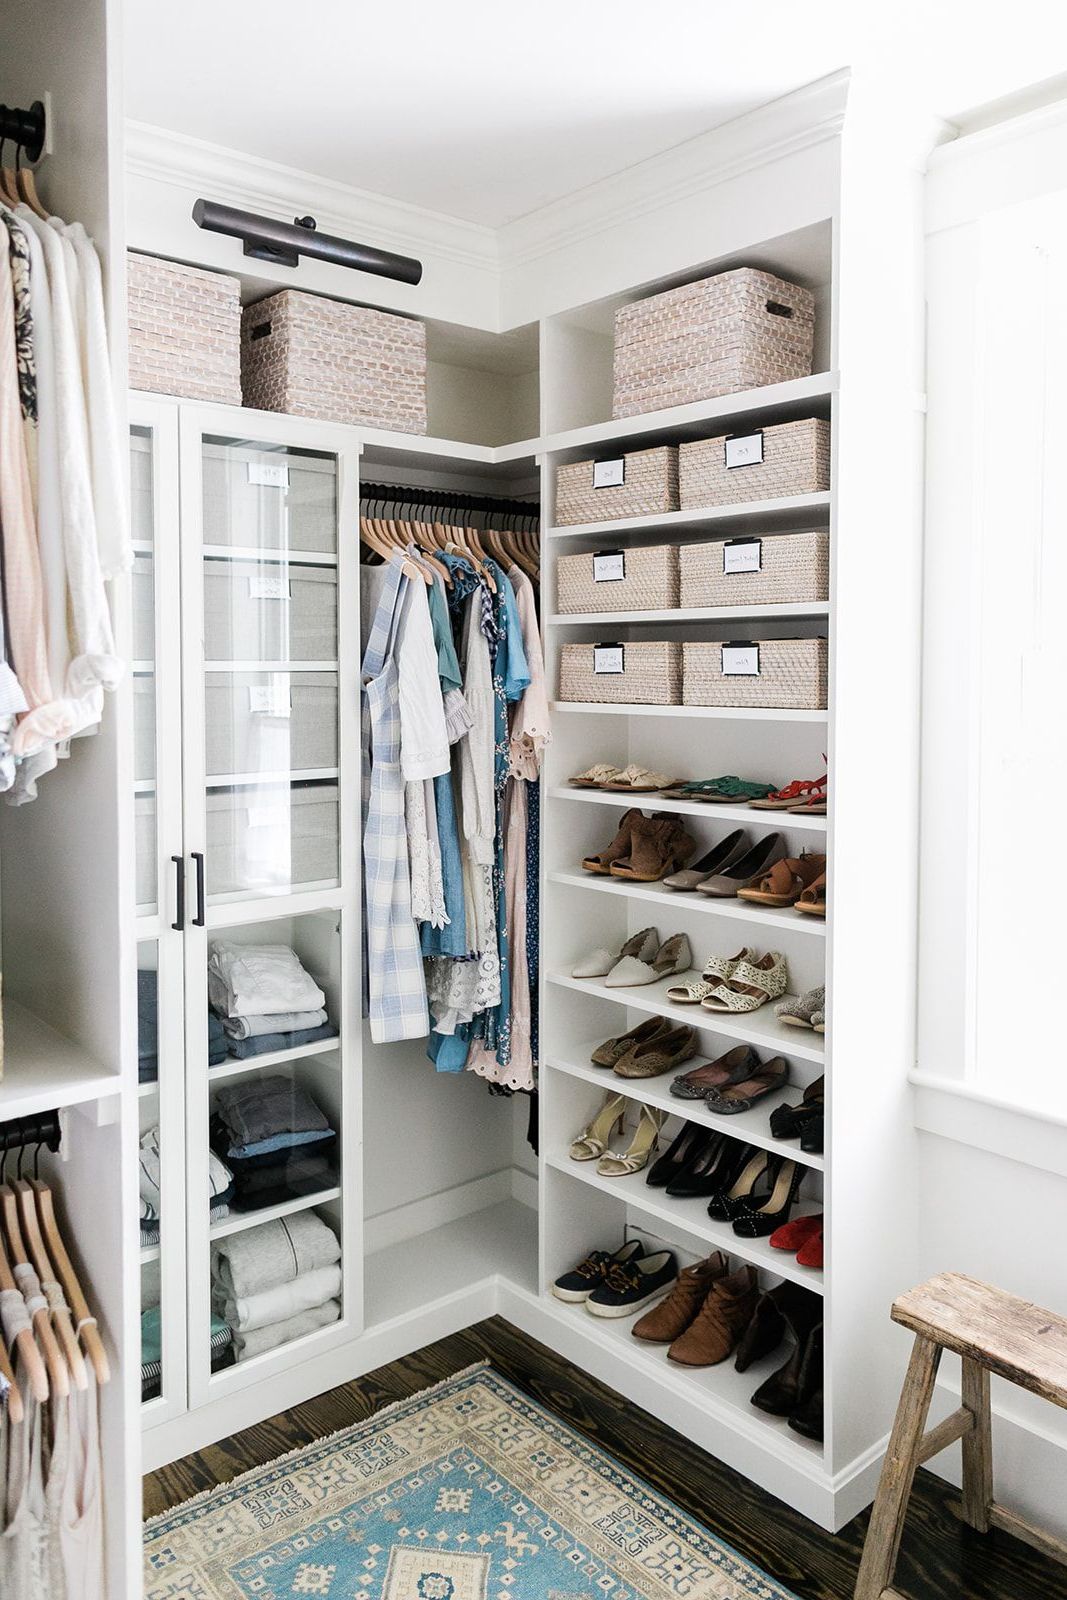 Ikea Closet Systems: What To Buy & How To Install Within Wardrobes Drawers And Shelves Ikea (View 10 of 20)